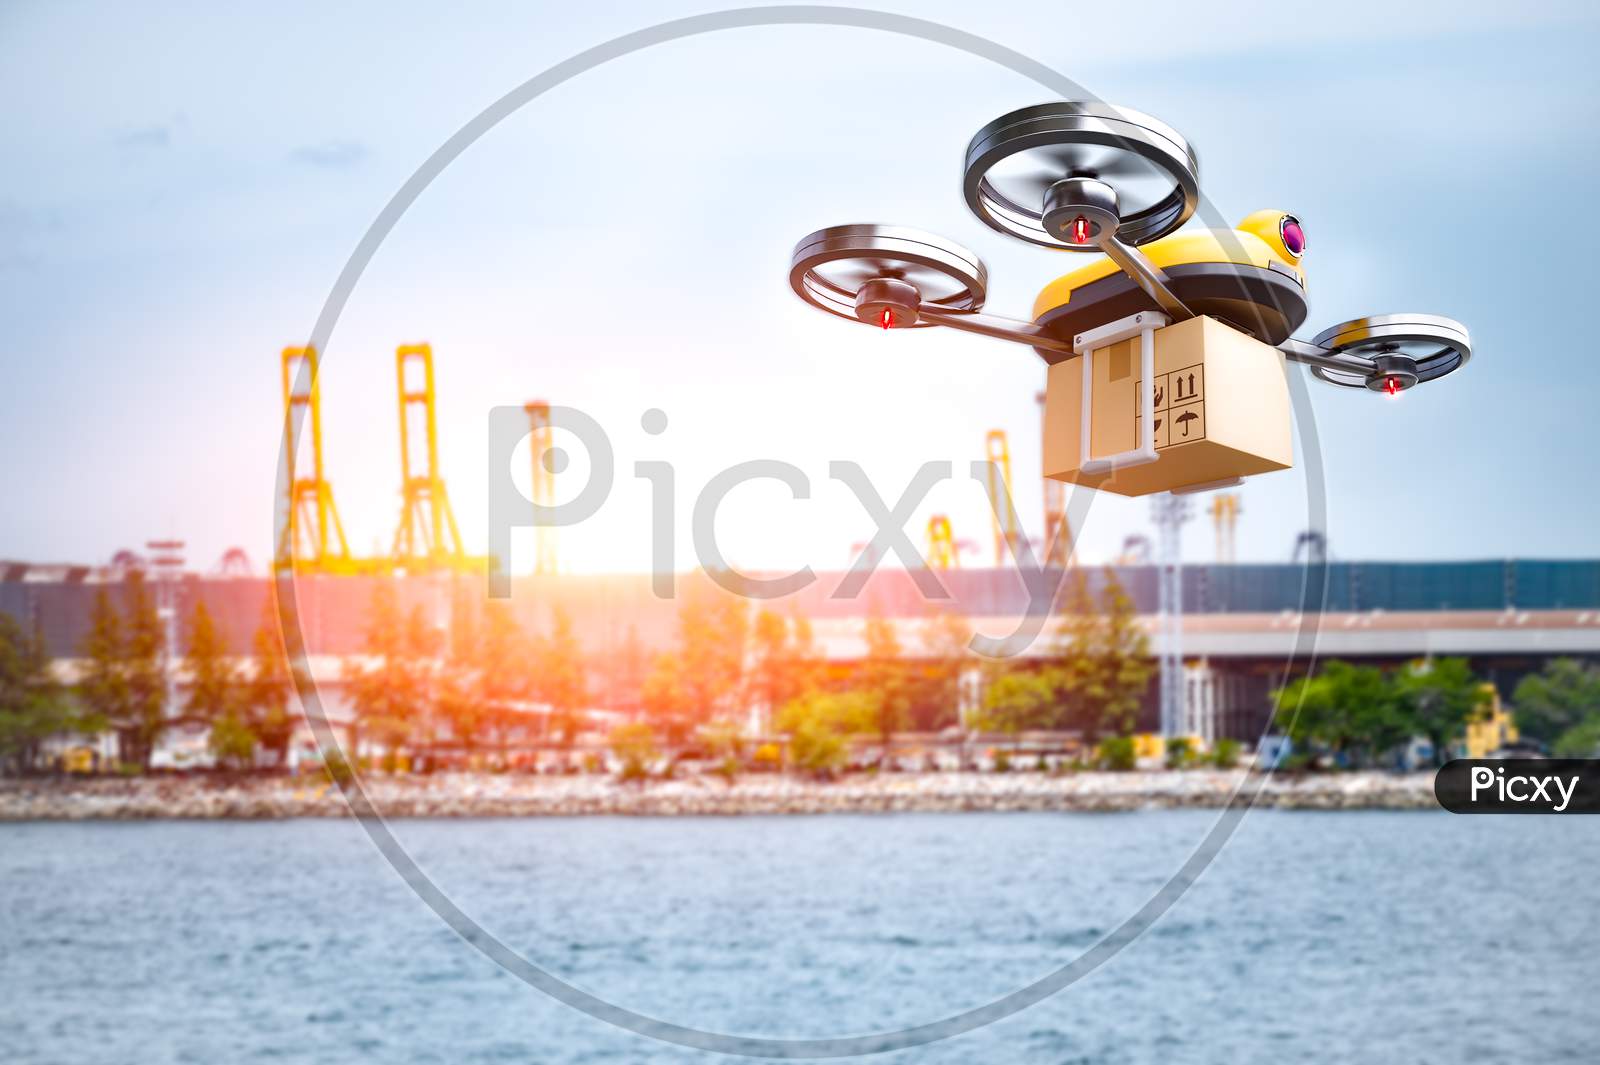 Delivery Drone Delivering Petrochemical Product From Oil Refinery For Shipping Fine And Crude Oil To Drilling Platforms Or Customer. Modern Innovative Technology And Security Gadget. Unmanned Drone